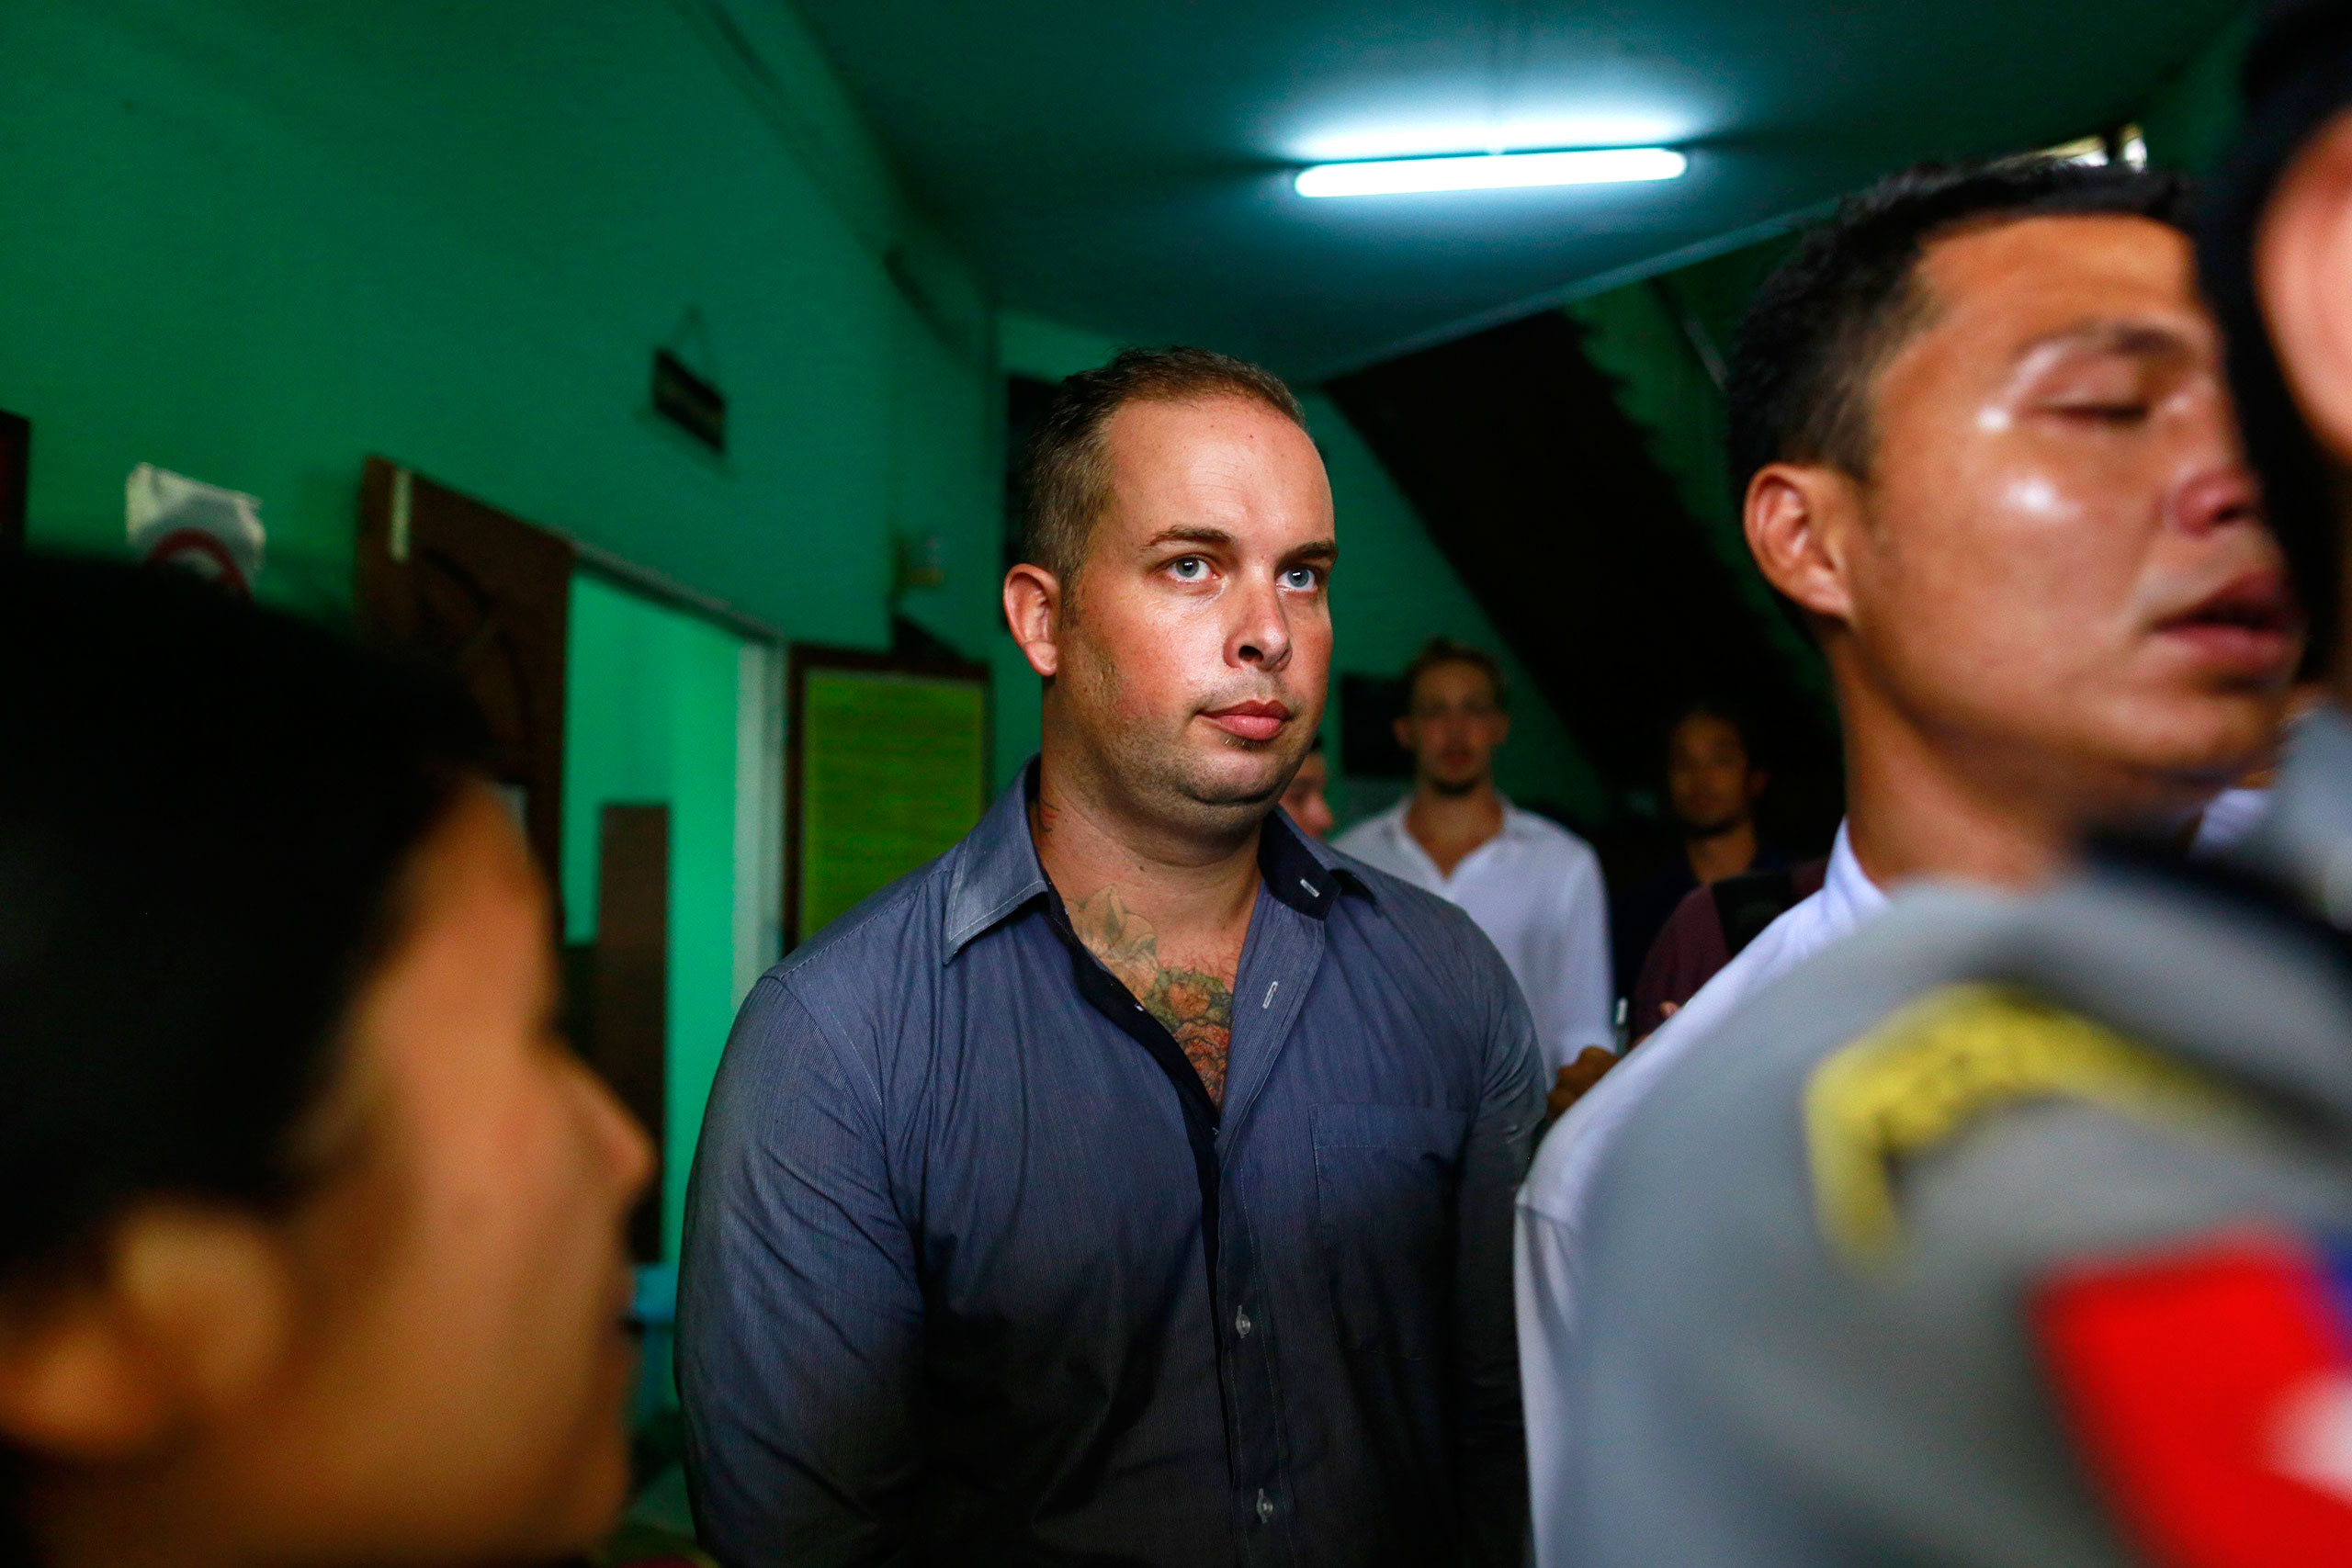 Phil Blackwood, a bar manager from New Zealand, comes out of court after being sentenced to two and half years in prison, at Bahan township court in Yangon on March 17, 2015.